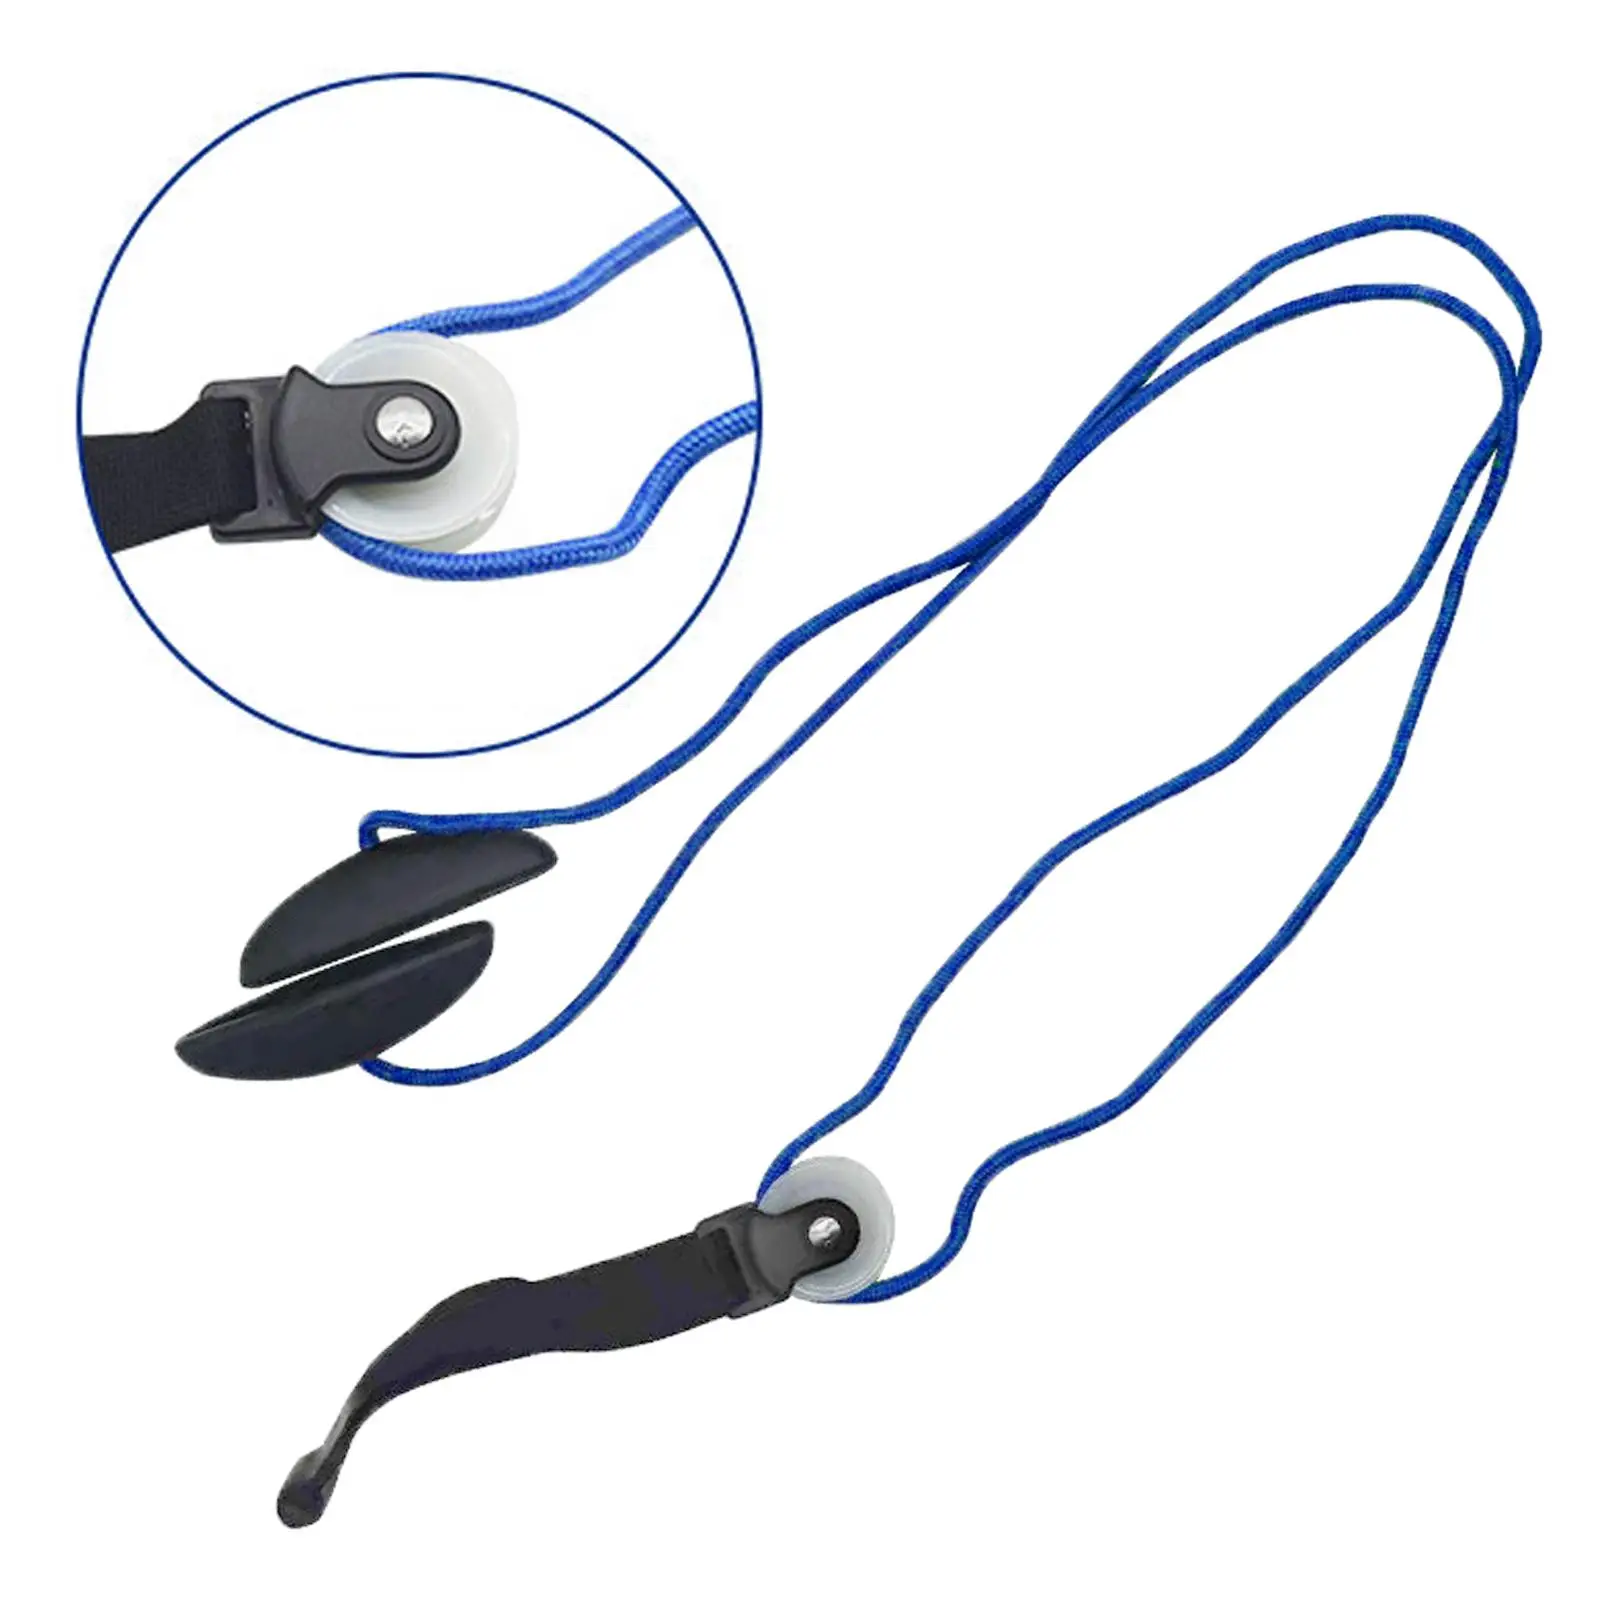  Pulley Over The Door Arm Exercise Rope Flexibility for Sports Device